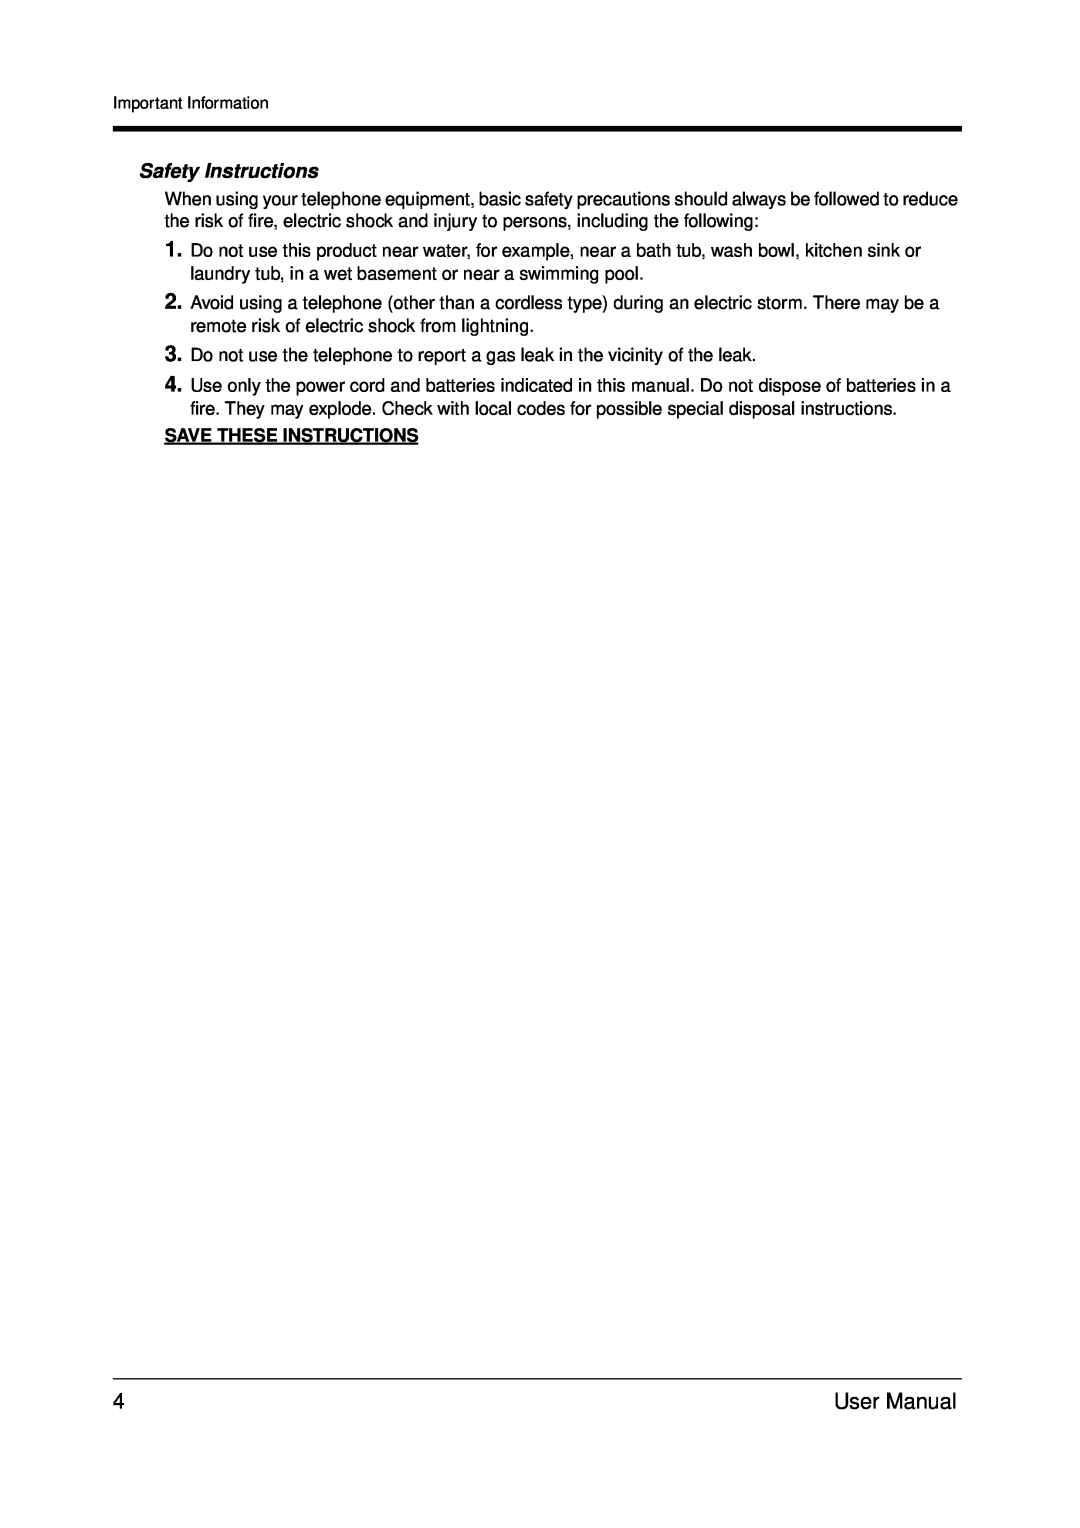 Panasonic KX-TDA200 user manual Safety Instructions, Save These Instructions 